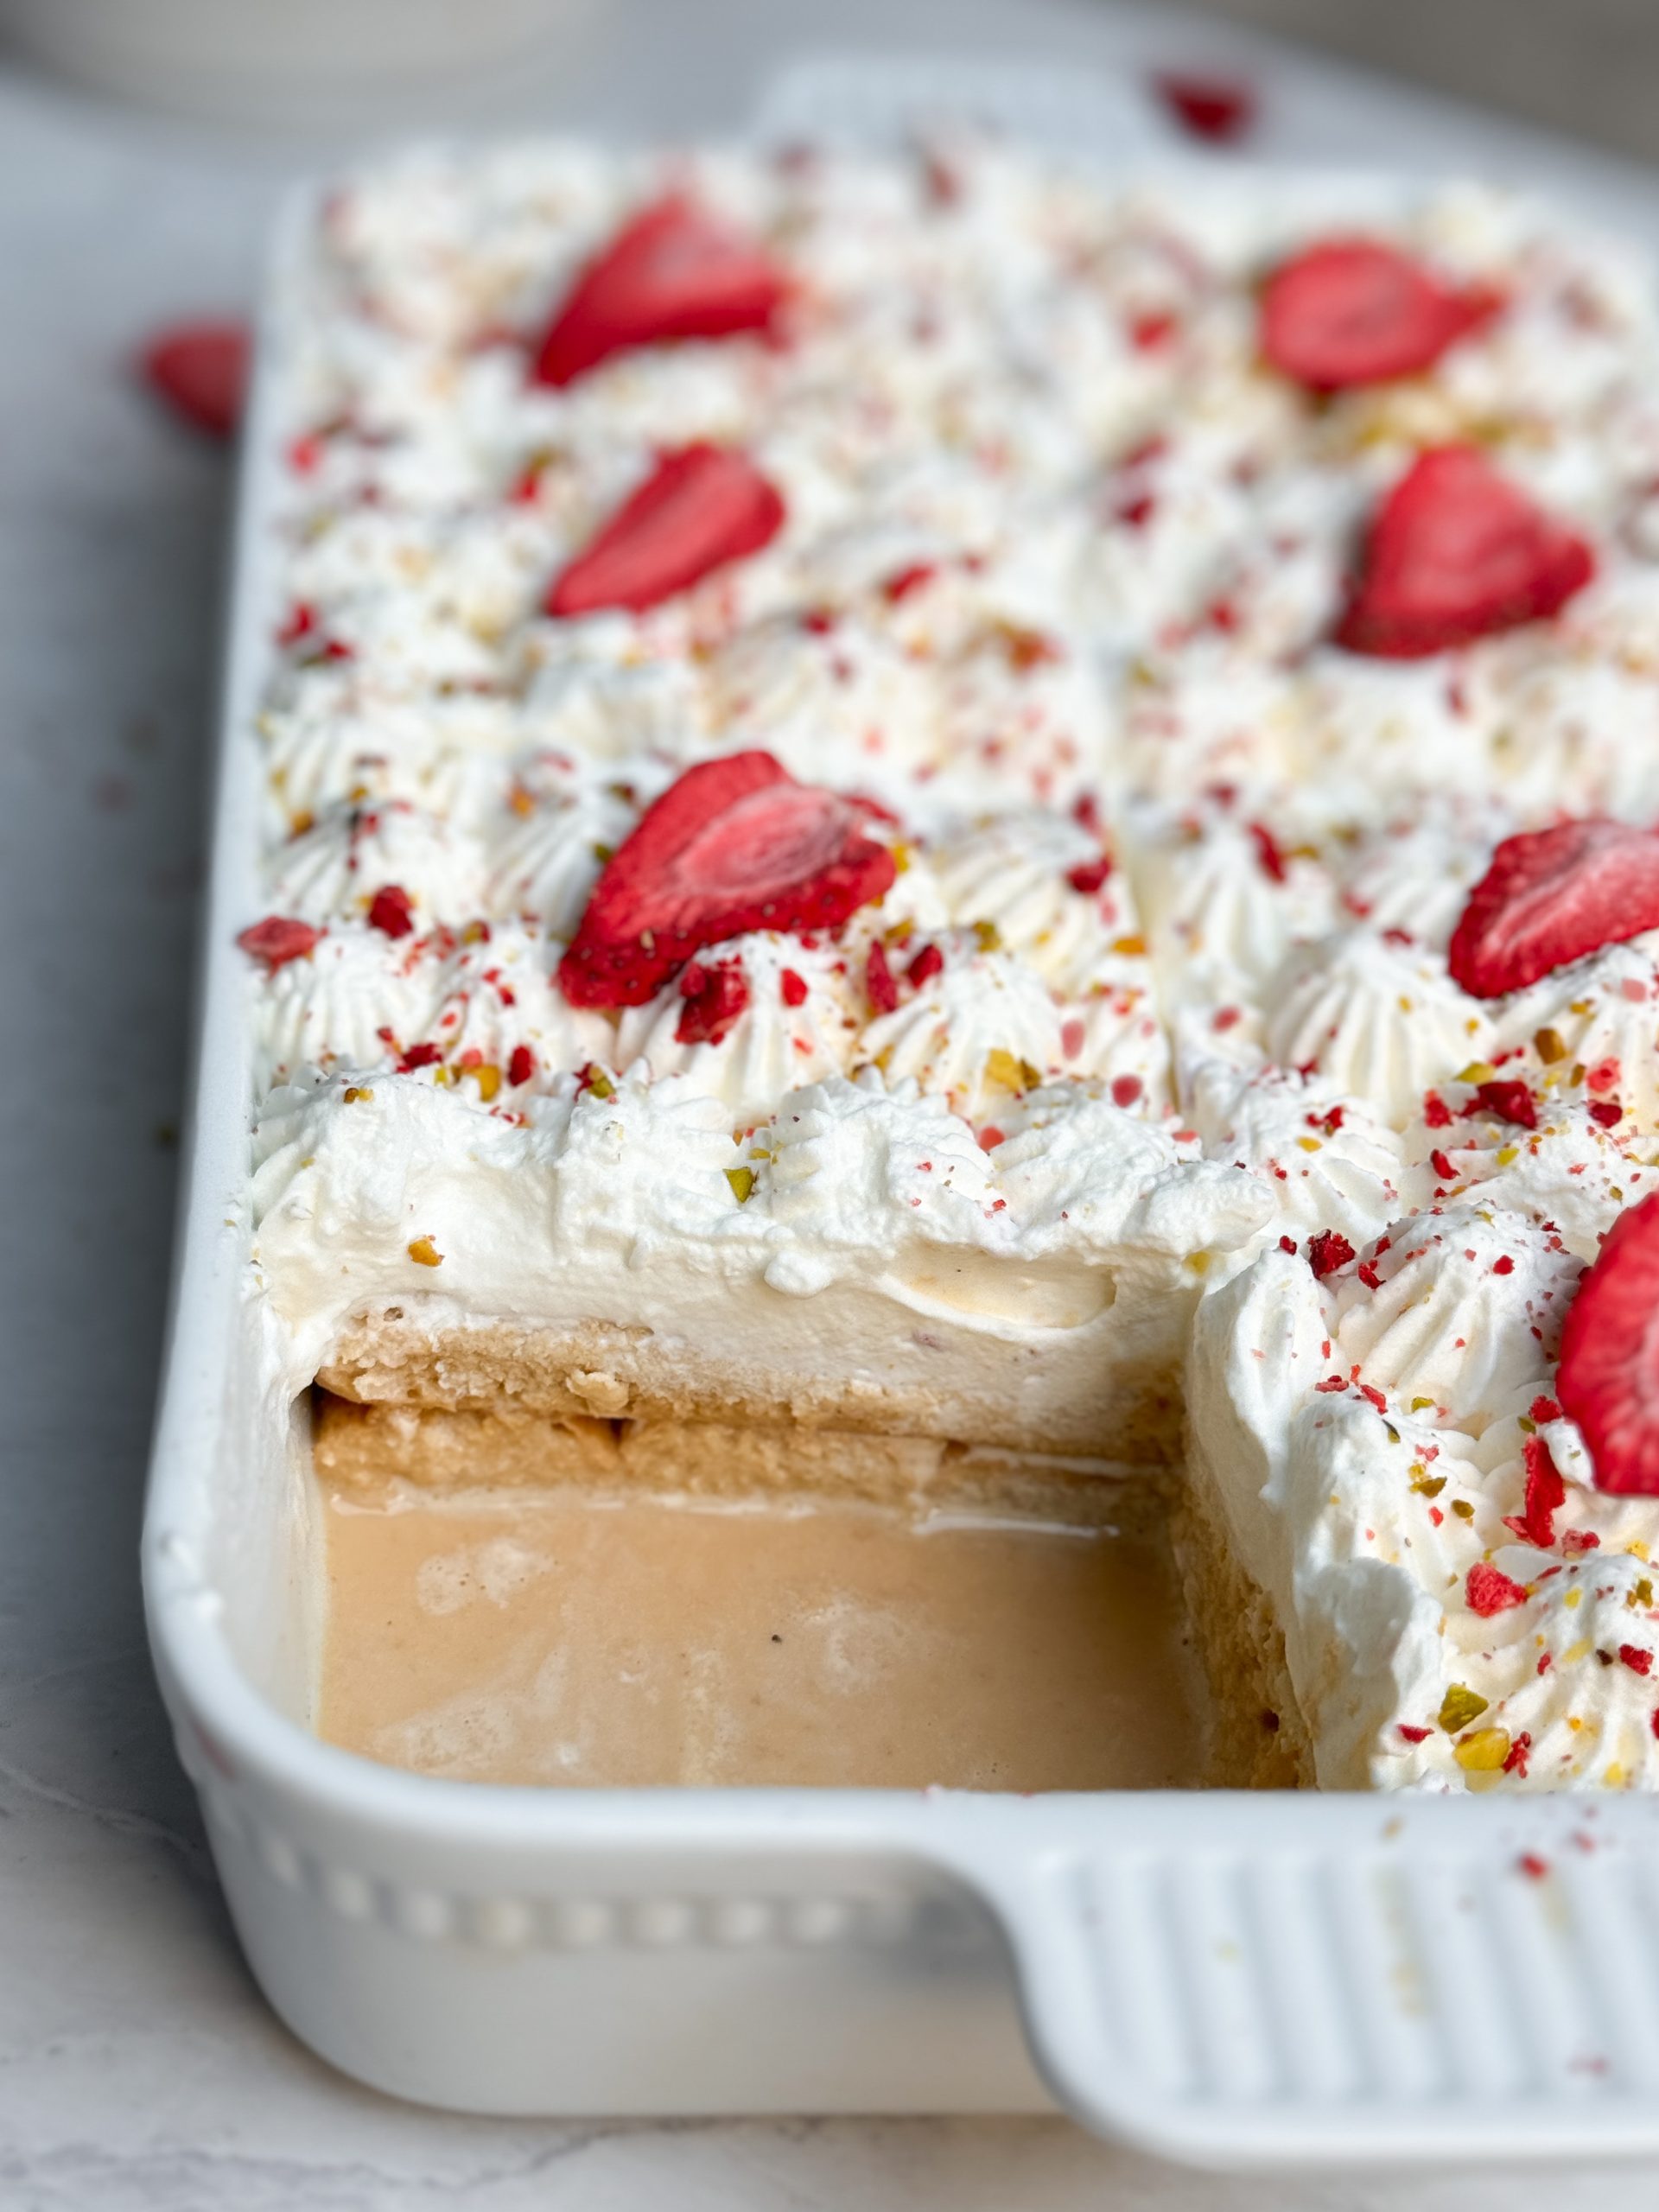 No bake chai tres leches cake in a rectangular ceramic dish decorated with piped whipped cream, freeze dried strawberries and pistachios, one slic eremoved to reveal moist chai soaked interior. close up image